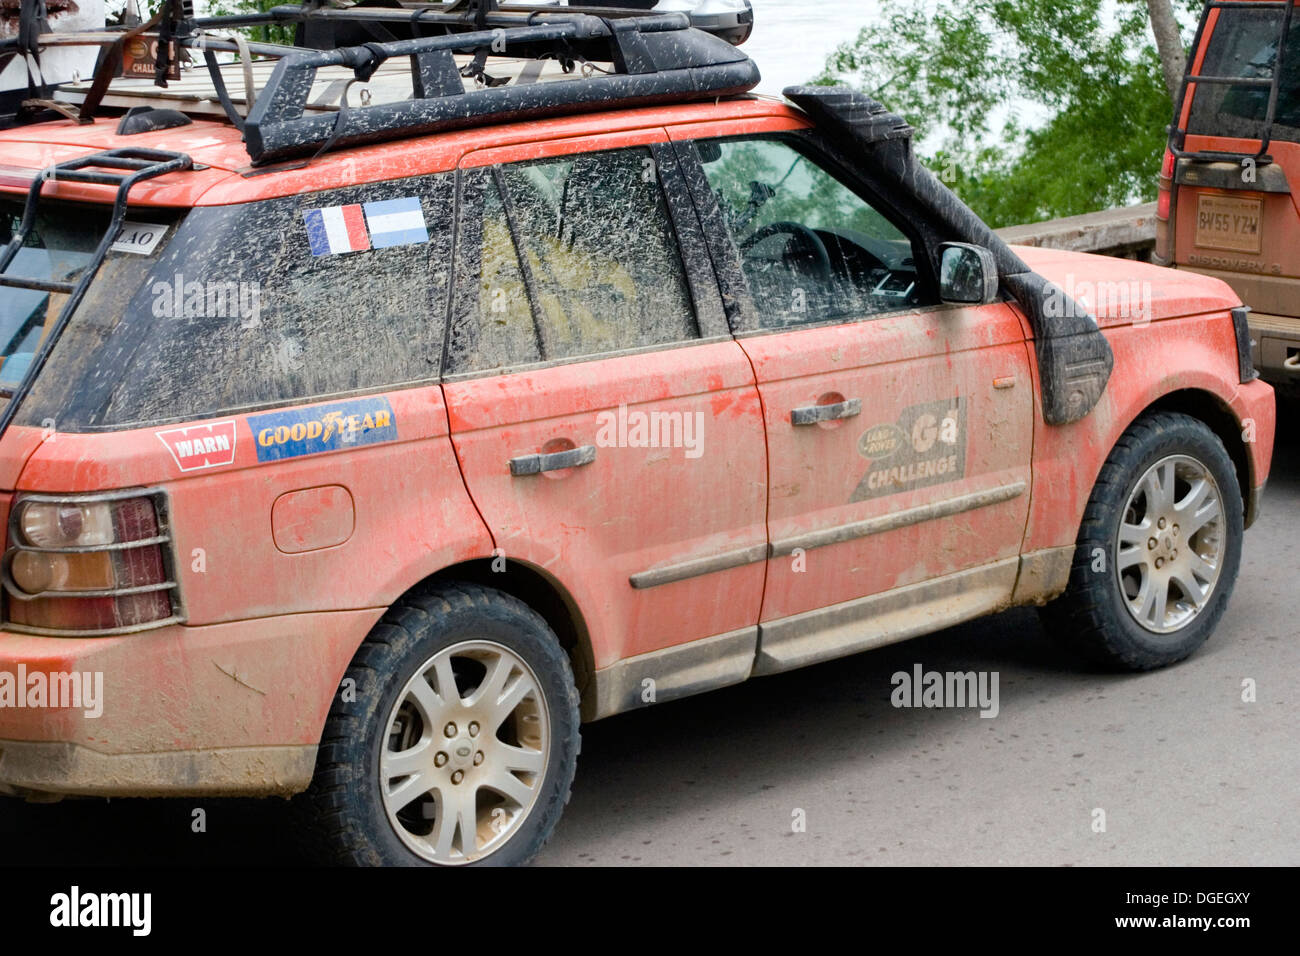 A vehicle taking part in the Land Rover G4 Challenge is splatterd with mud on a city street in Luang Prabang, Laos. Stock Photo